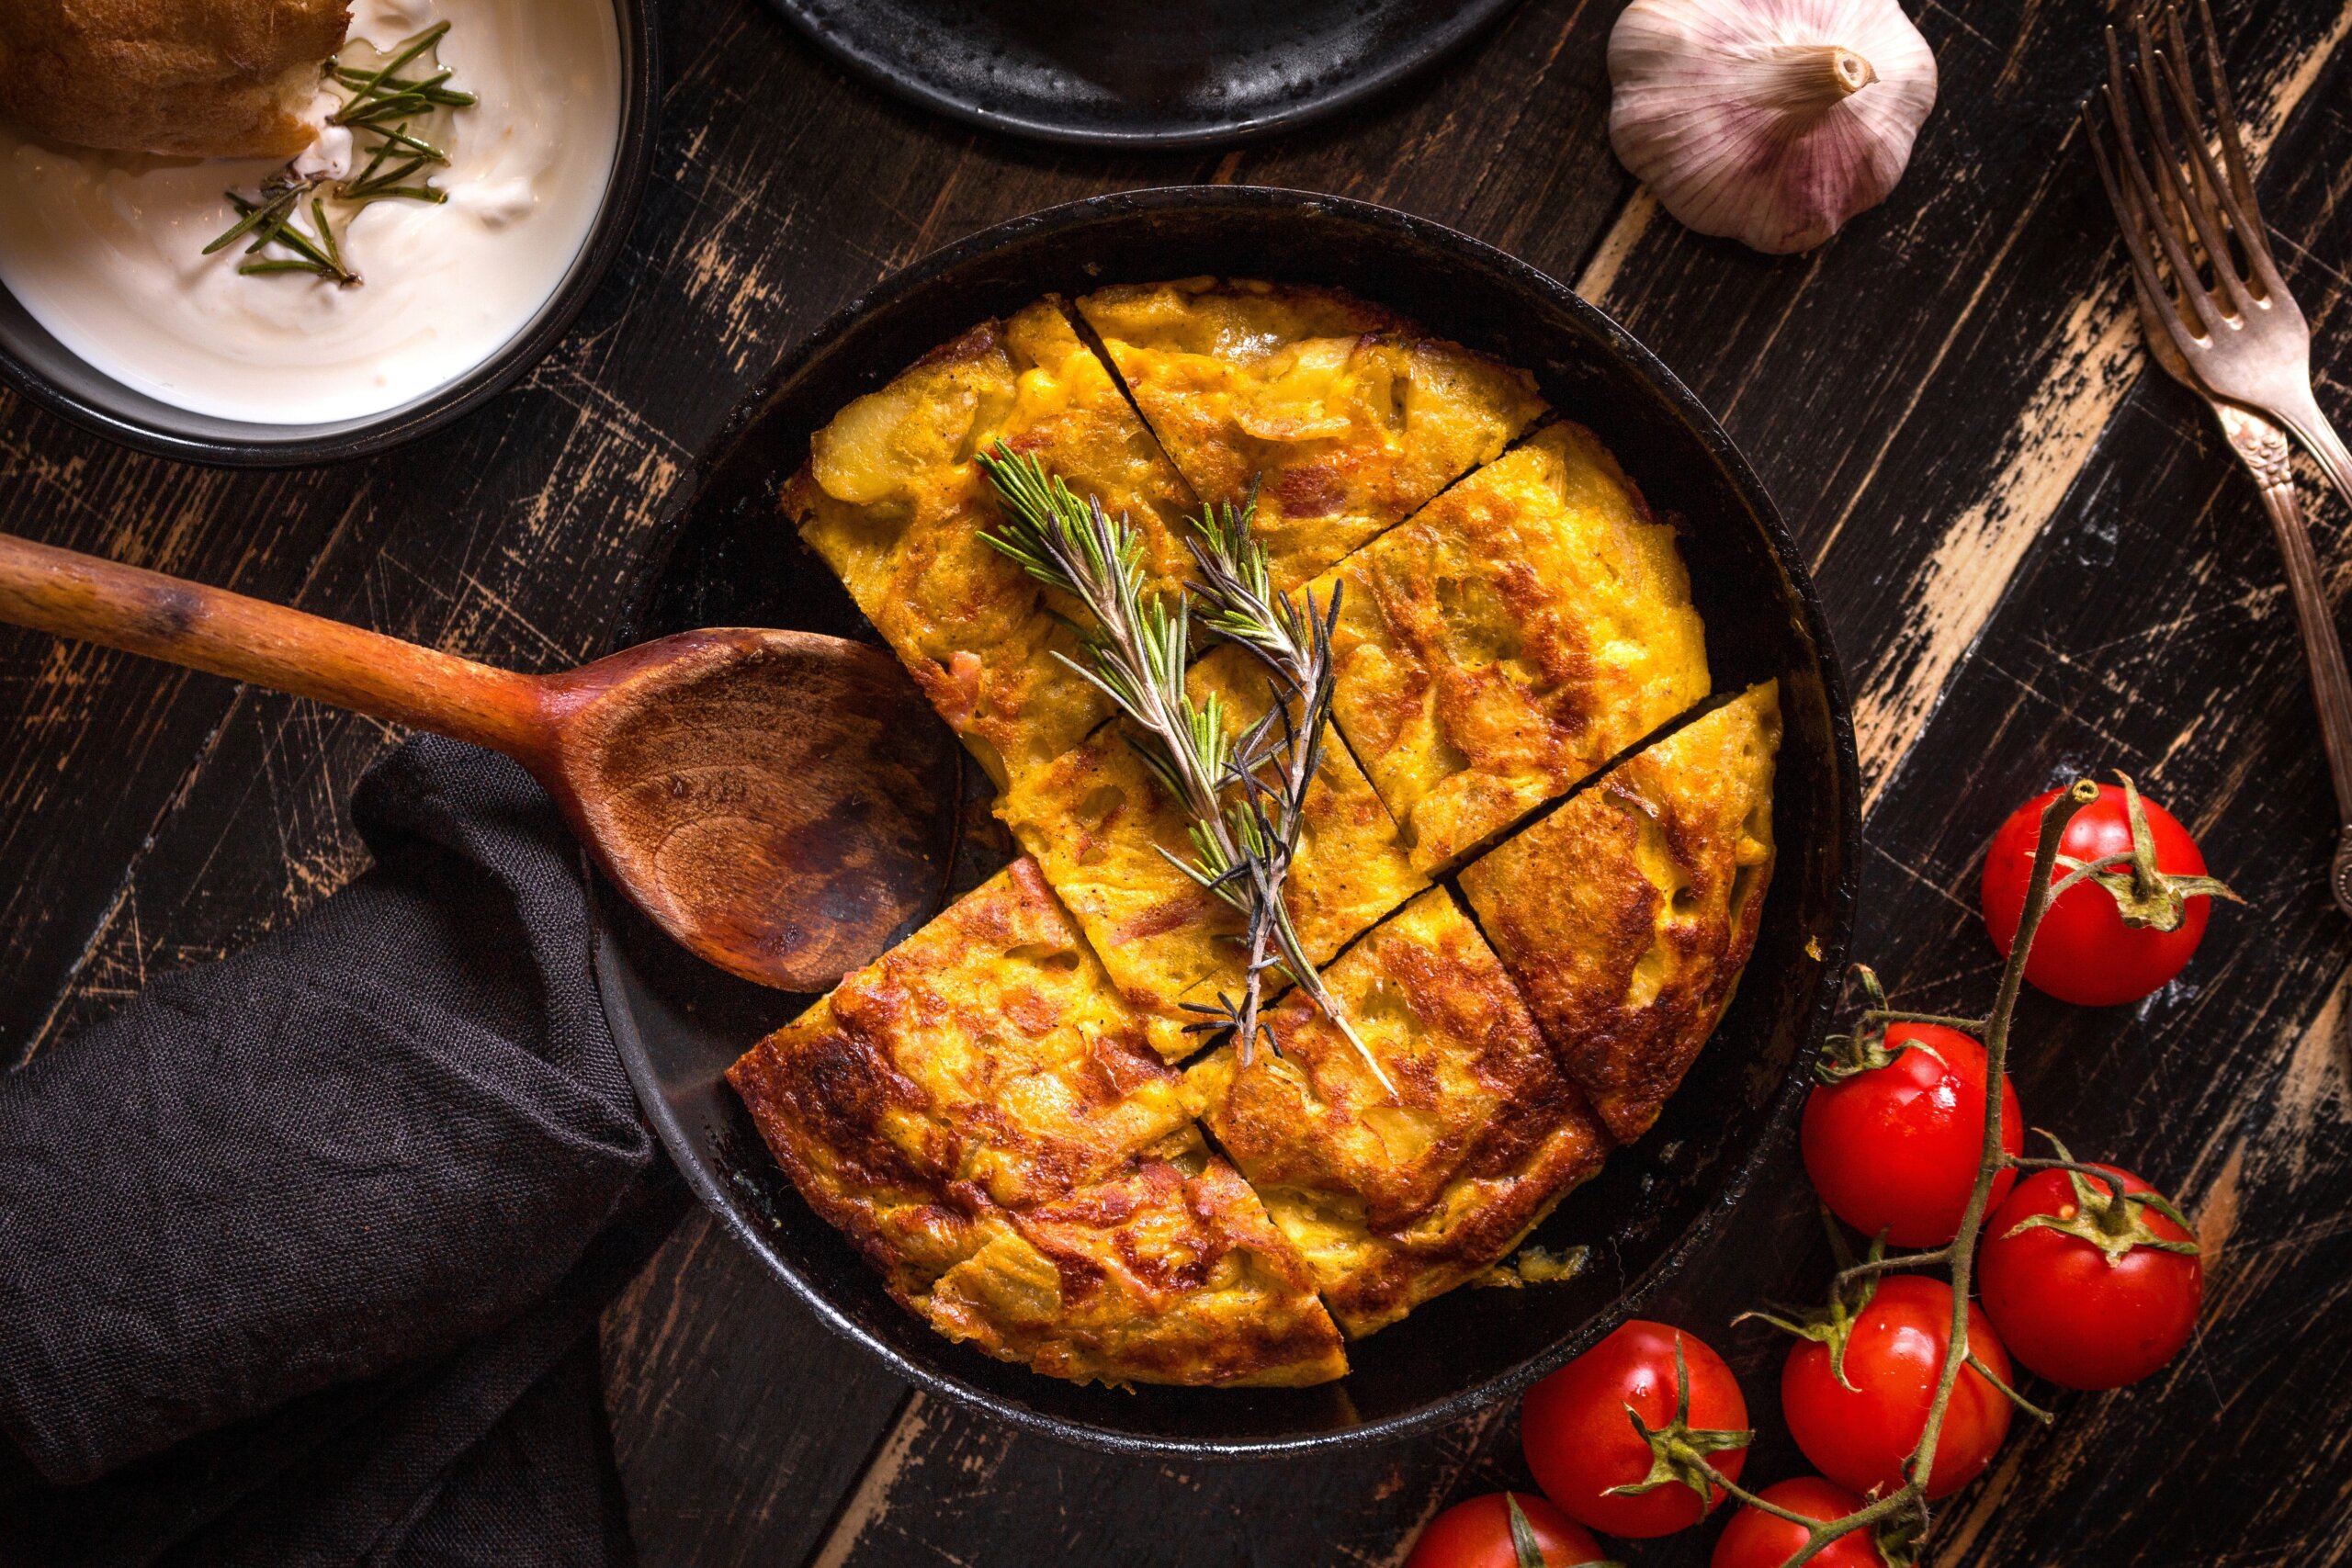 Spanish omelette with onion and tomato